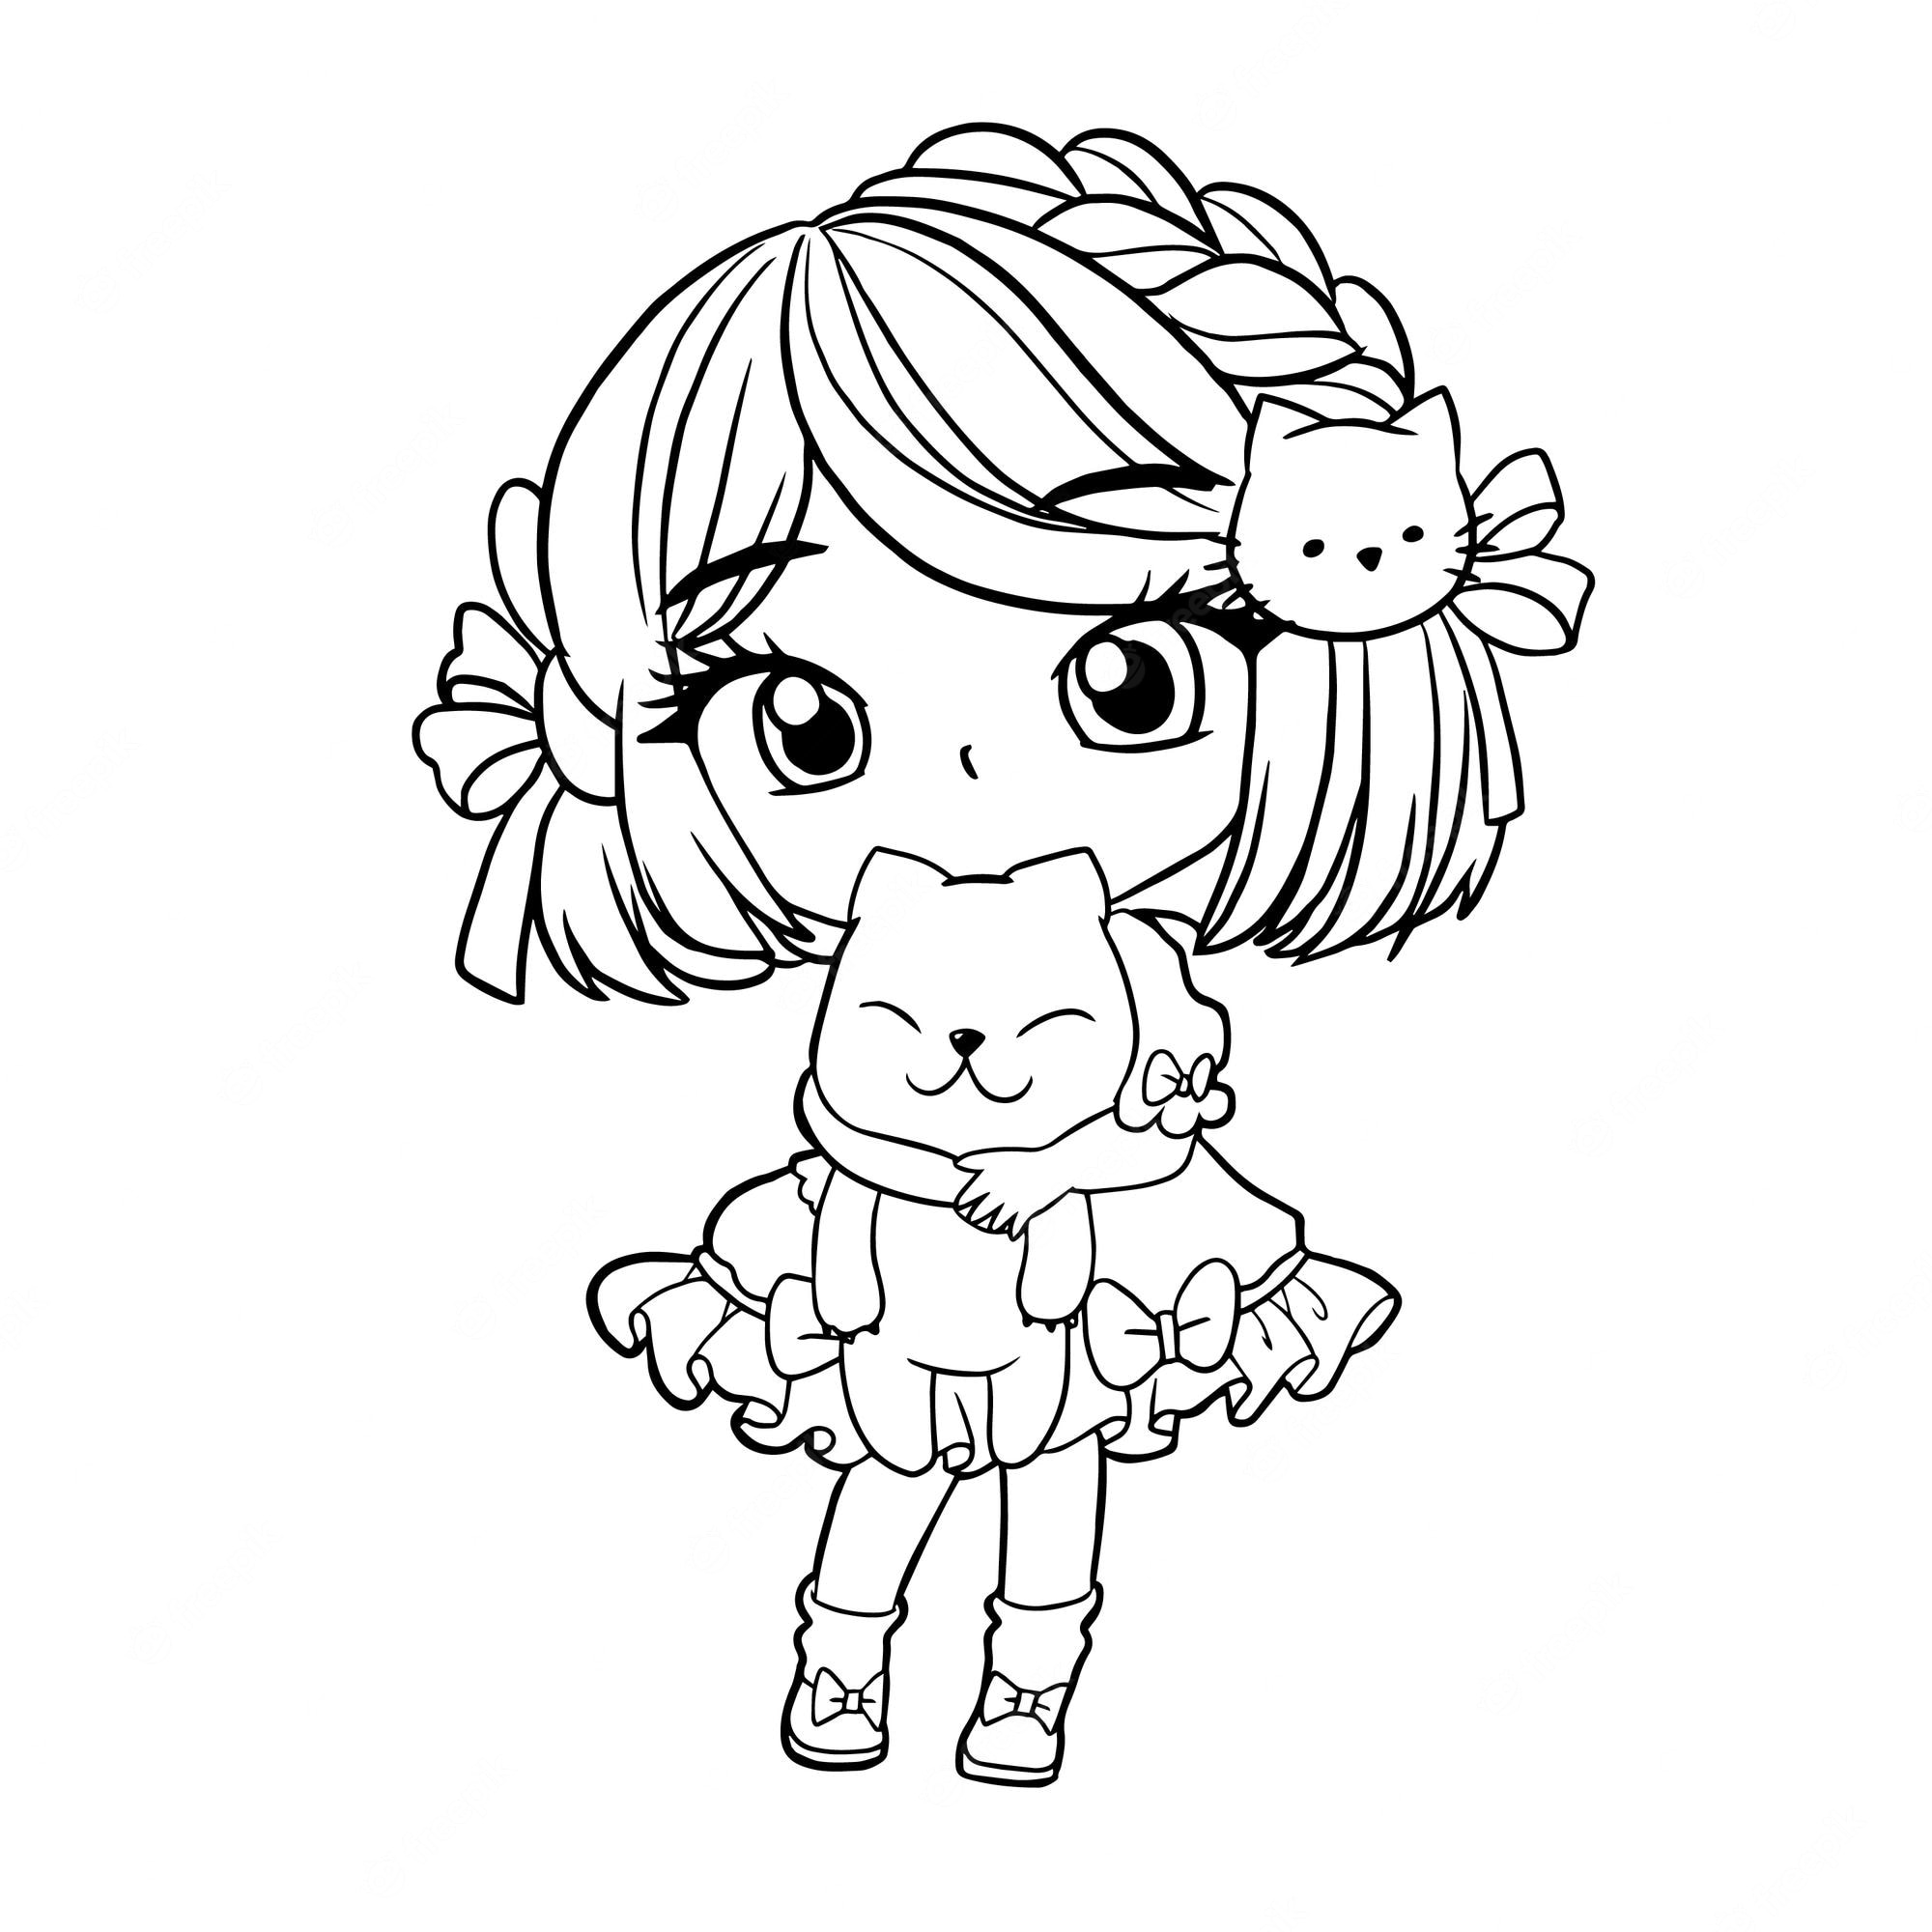 Cute Anime Girls Coloring Pages Coloring Home